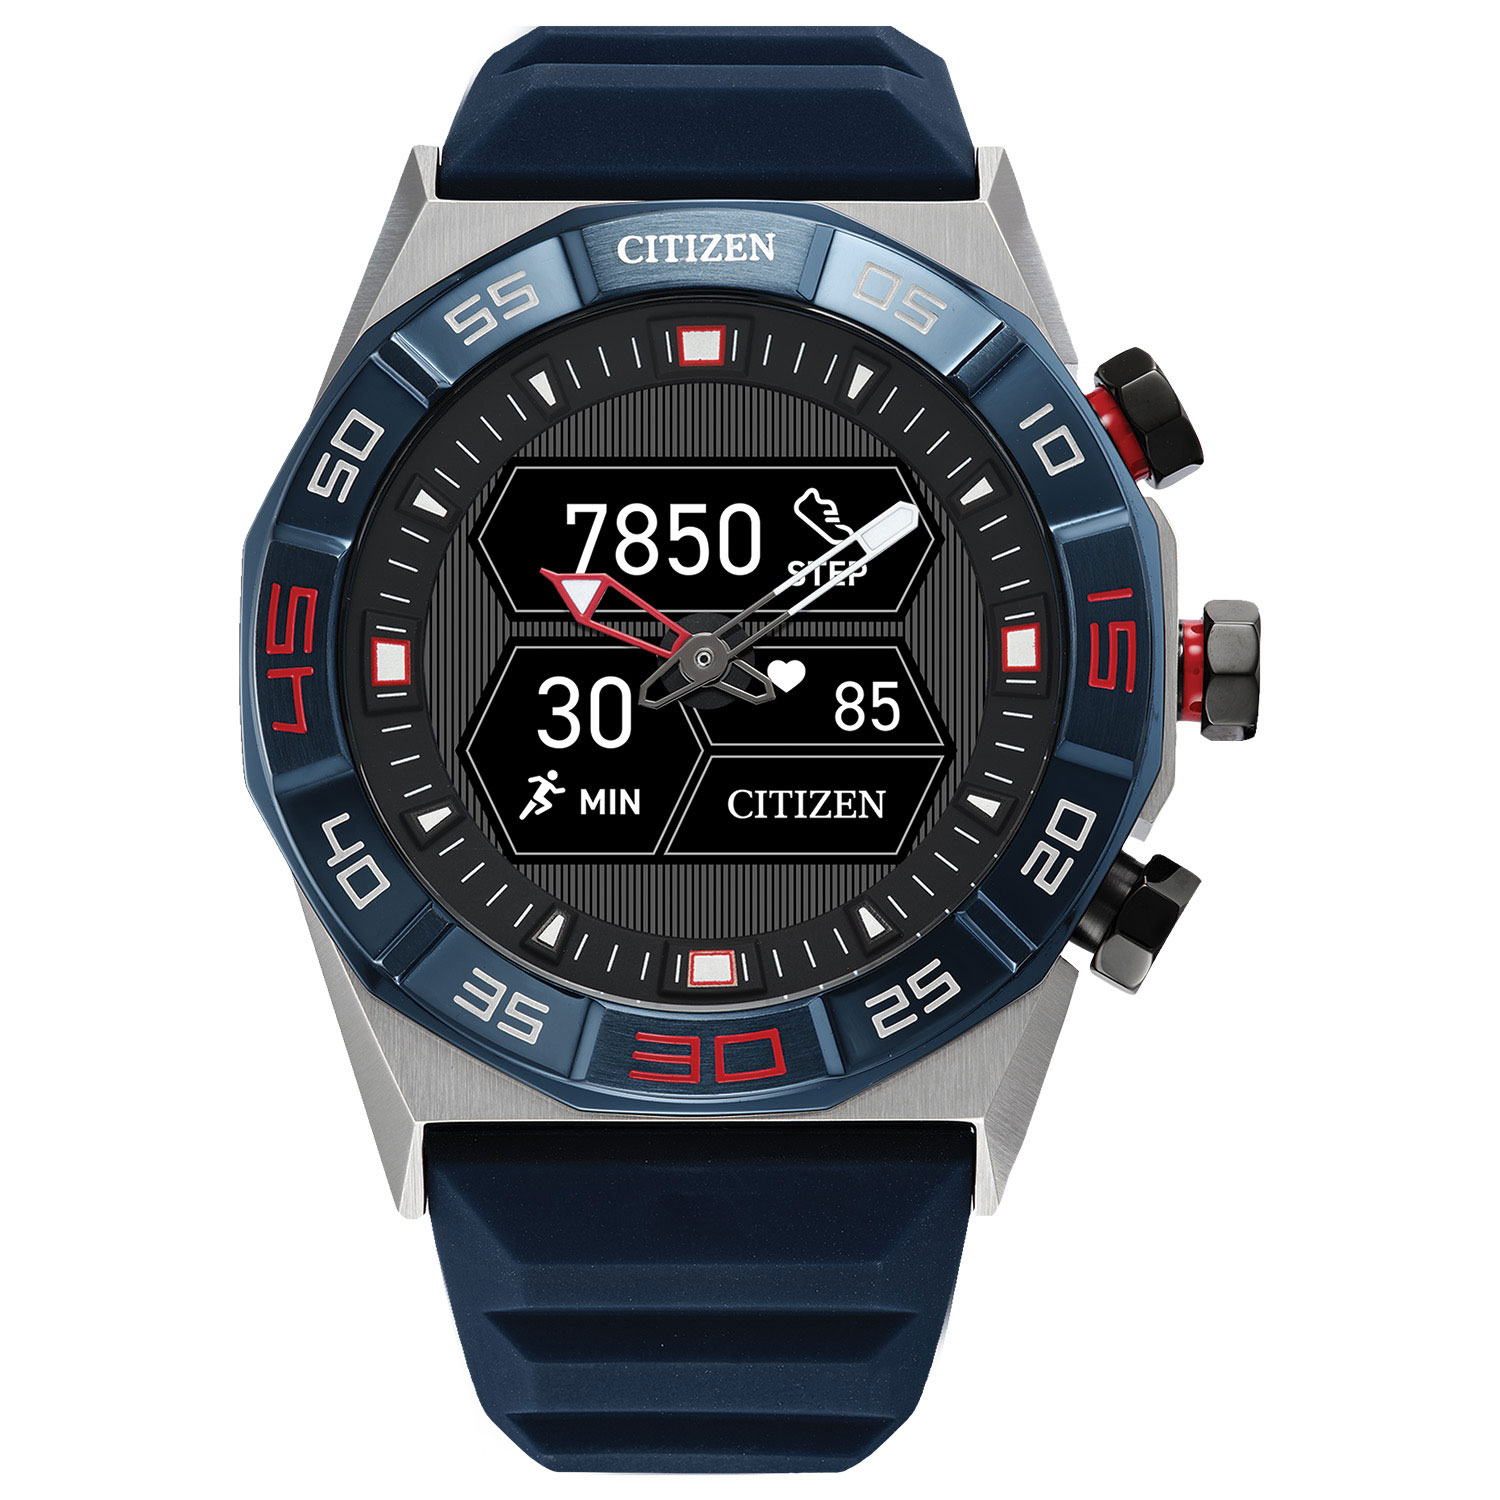 Citizen CZ Smart Hybrid Extreme 44mm GPS Smartwatch with Heart Rate Monitor - Medium / Large - Black